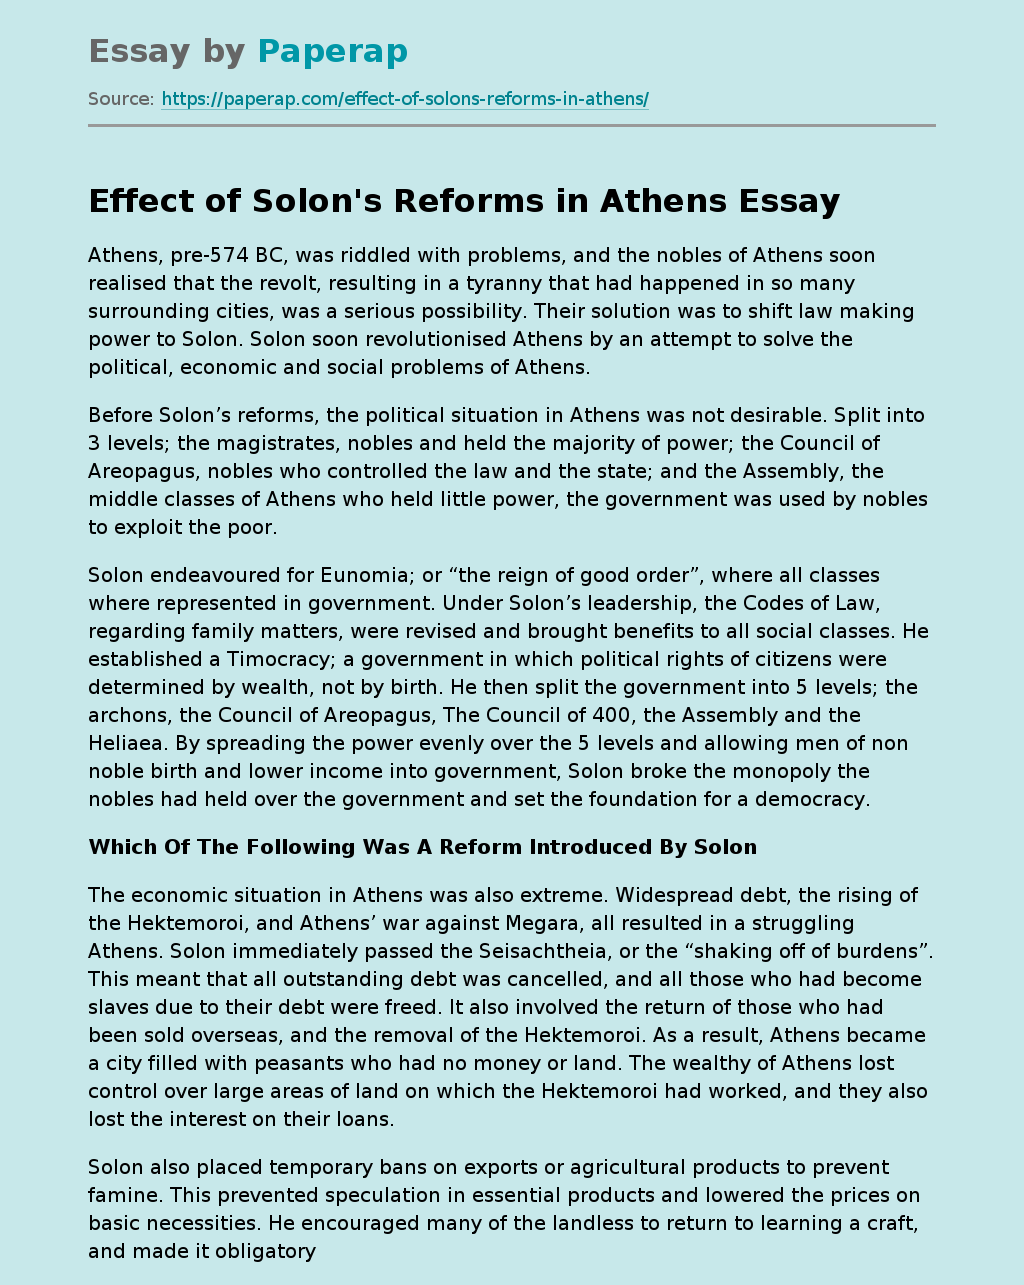 Effect of Solon's Reforms in Athens